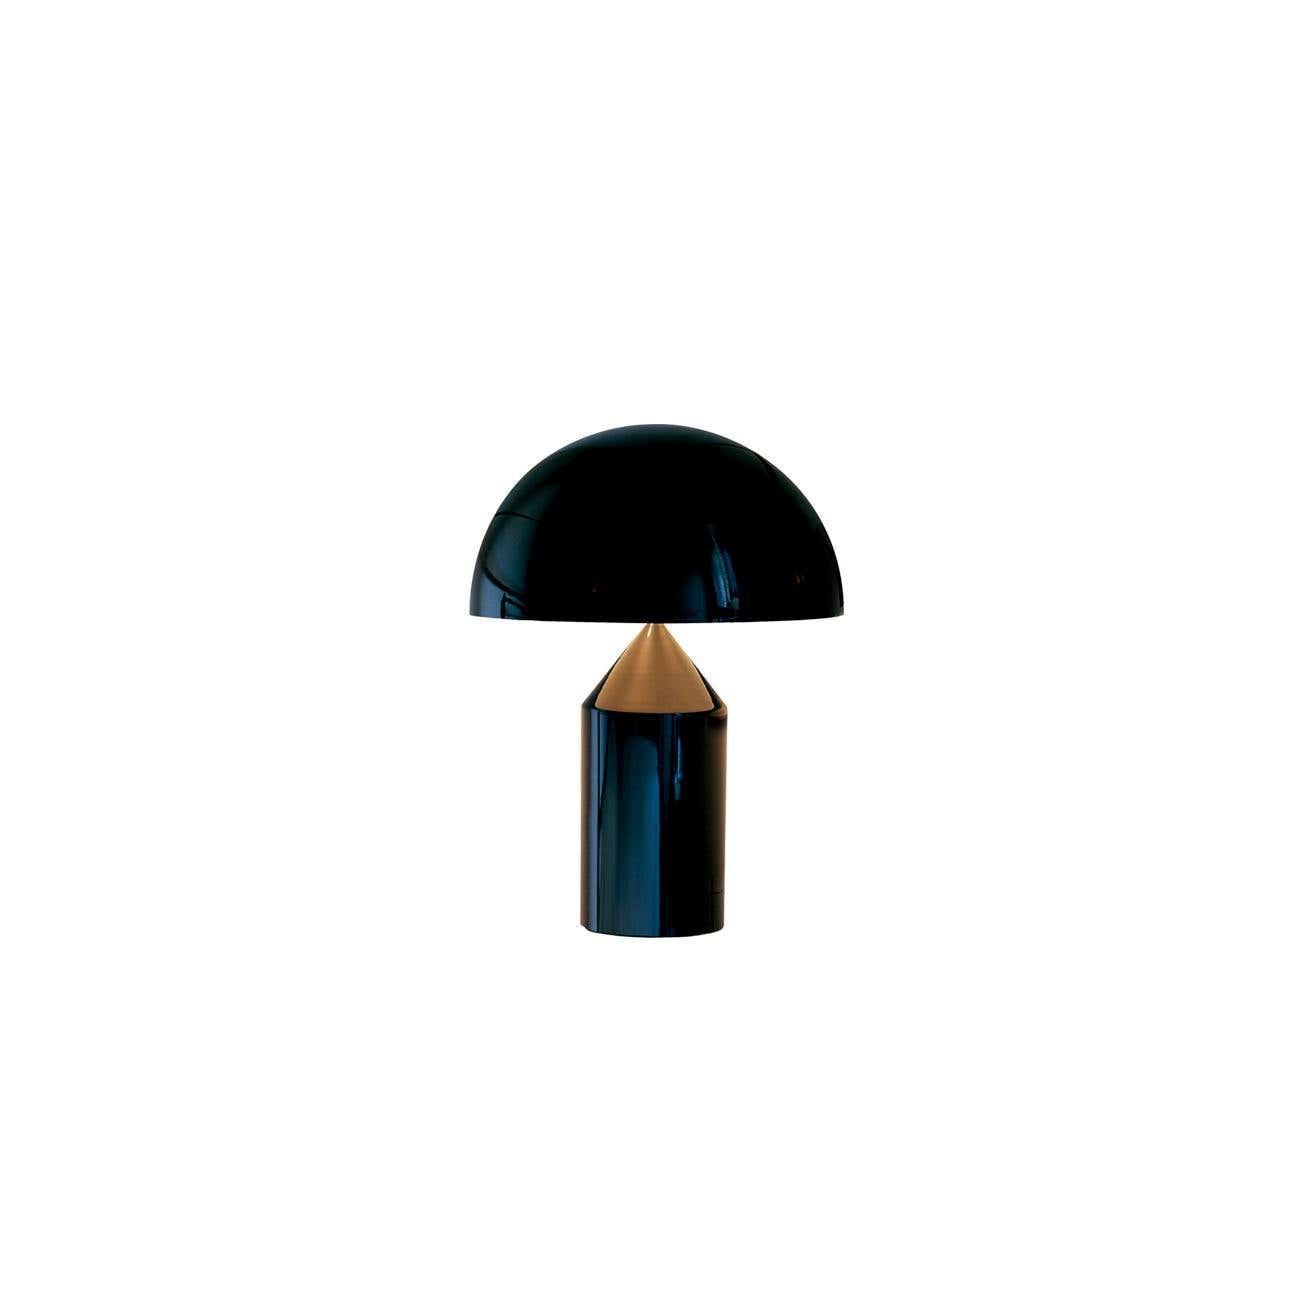 Contemporary Set of 'Atollo' Large and Small Black Table Lamp by Vico Magistretti for Oluce